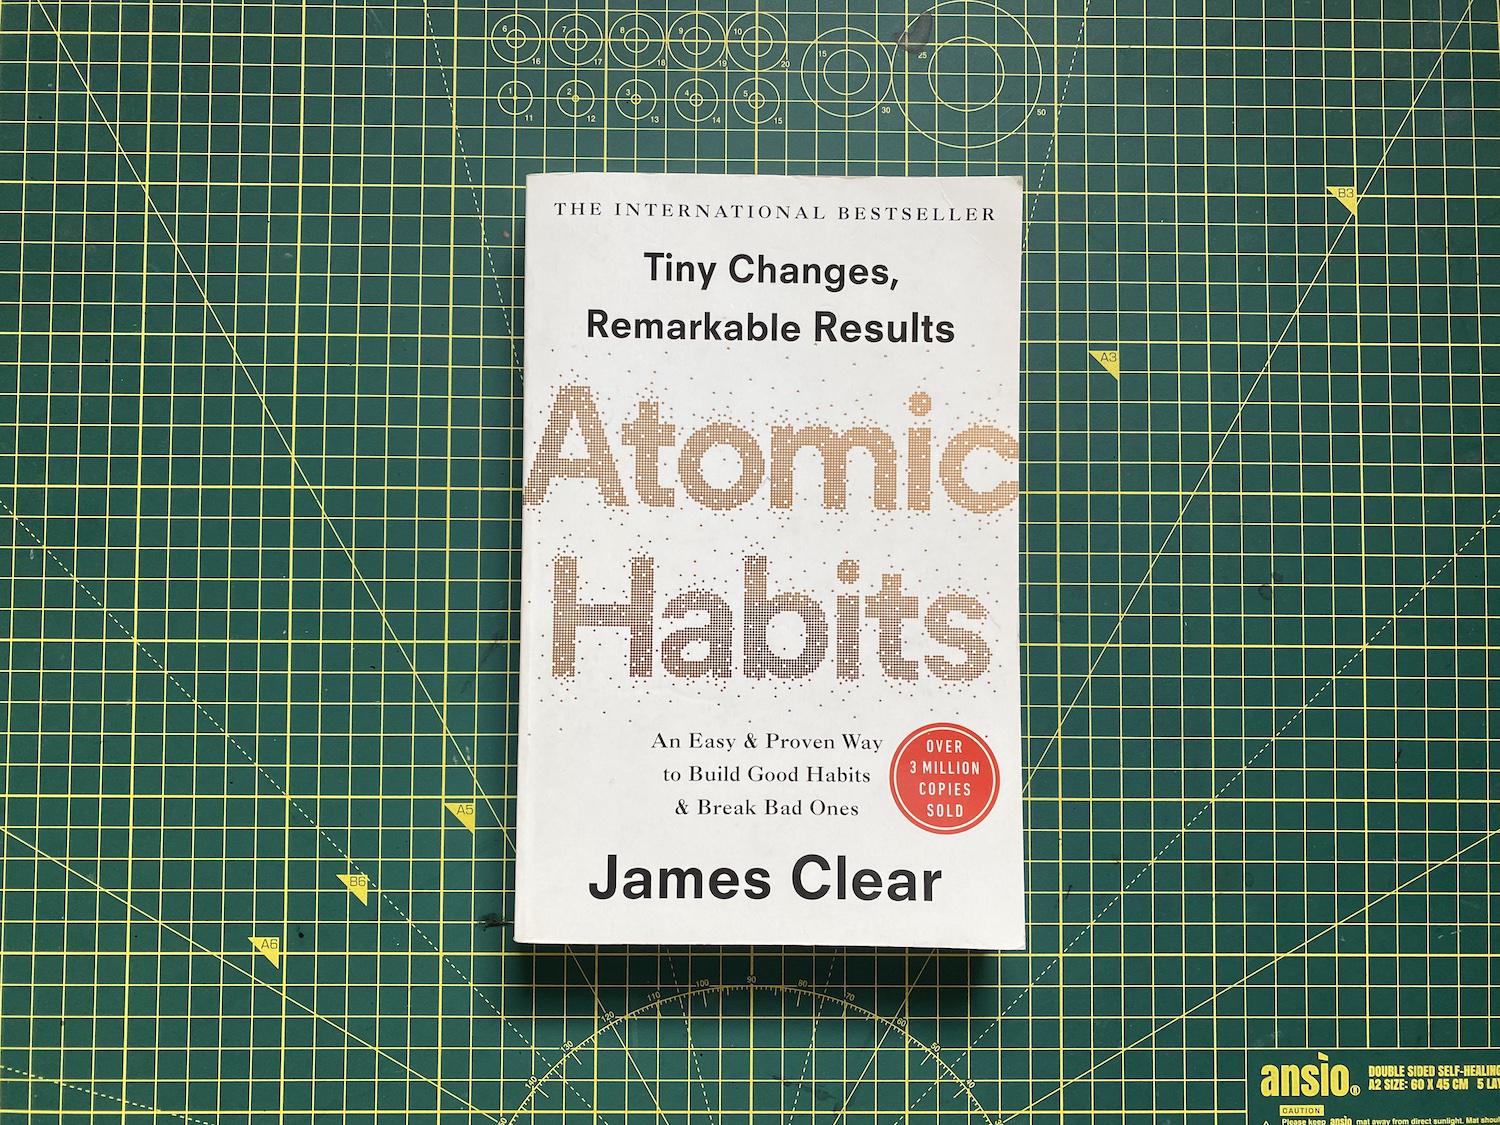 The cover of Atomic Habits by Jame Clear